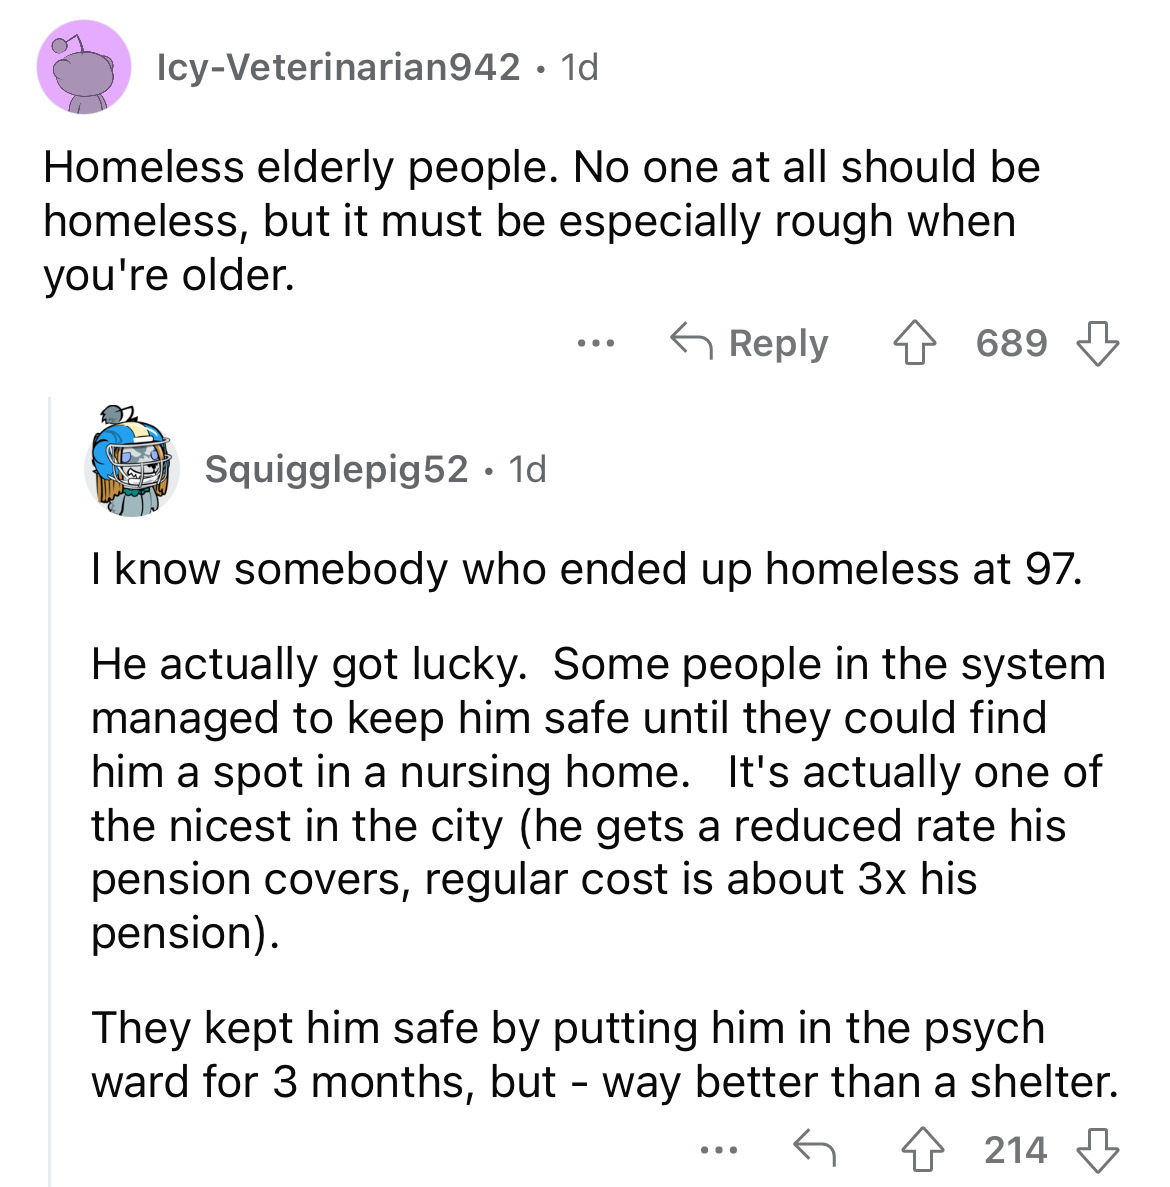 angle - IcyVeterinarian942 1d Homeless elderly people. No one at all should be homeless, but it must be especially rough when you're older. ... 689 Squigglepig52 1d I know somebody who ended up homeless at 97. He actually got lucky. Some people in the sys